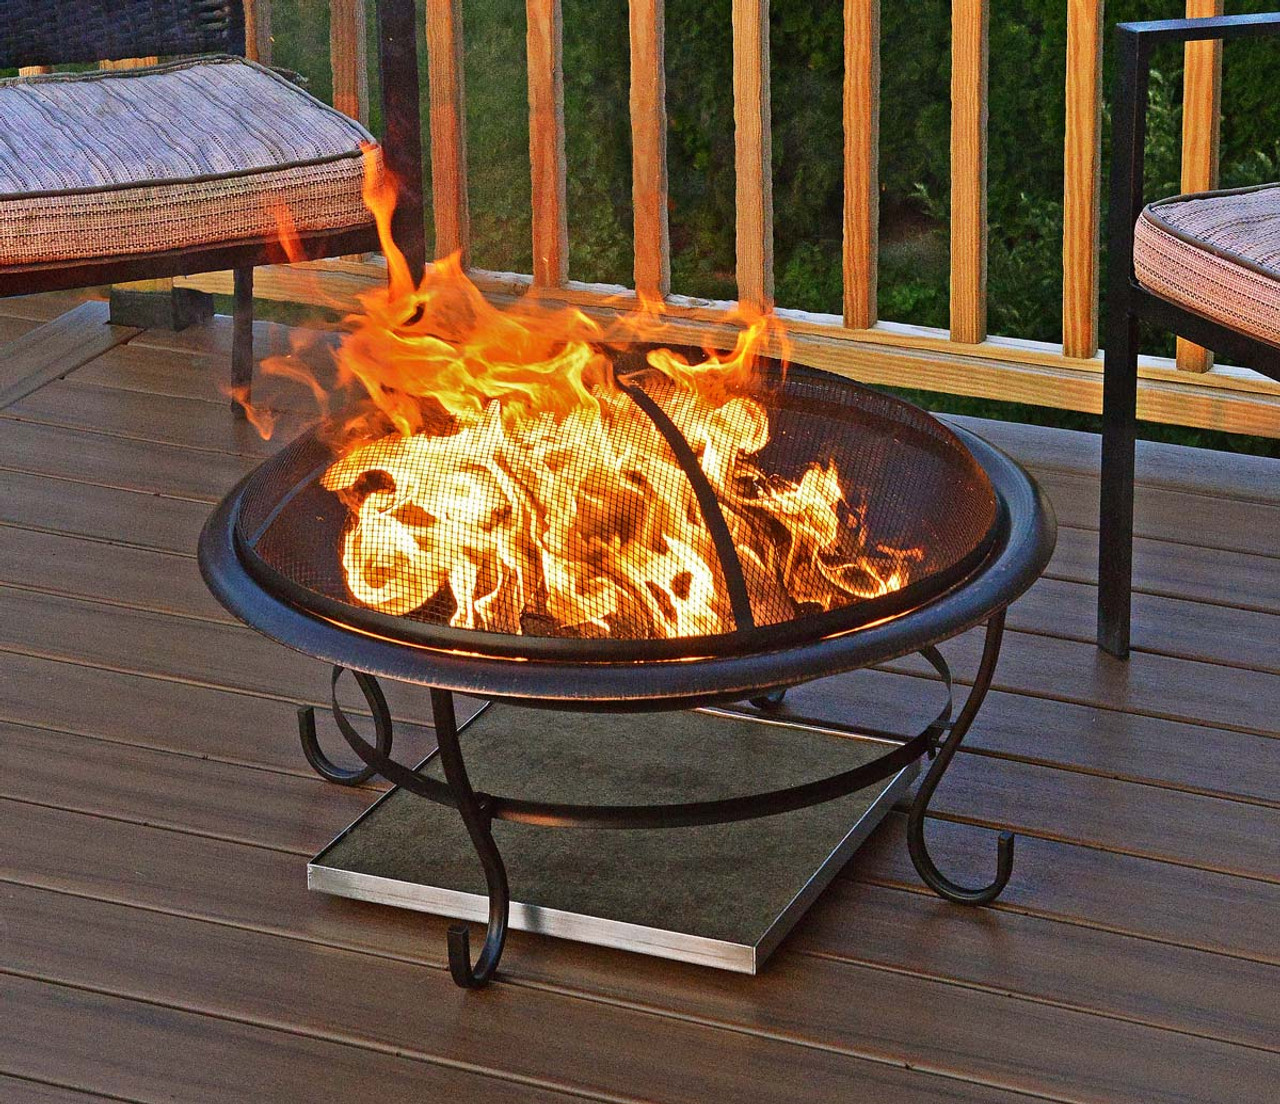 What To Put Under A Fire Pit On Grass Or Wooden Deck ...